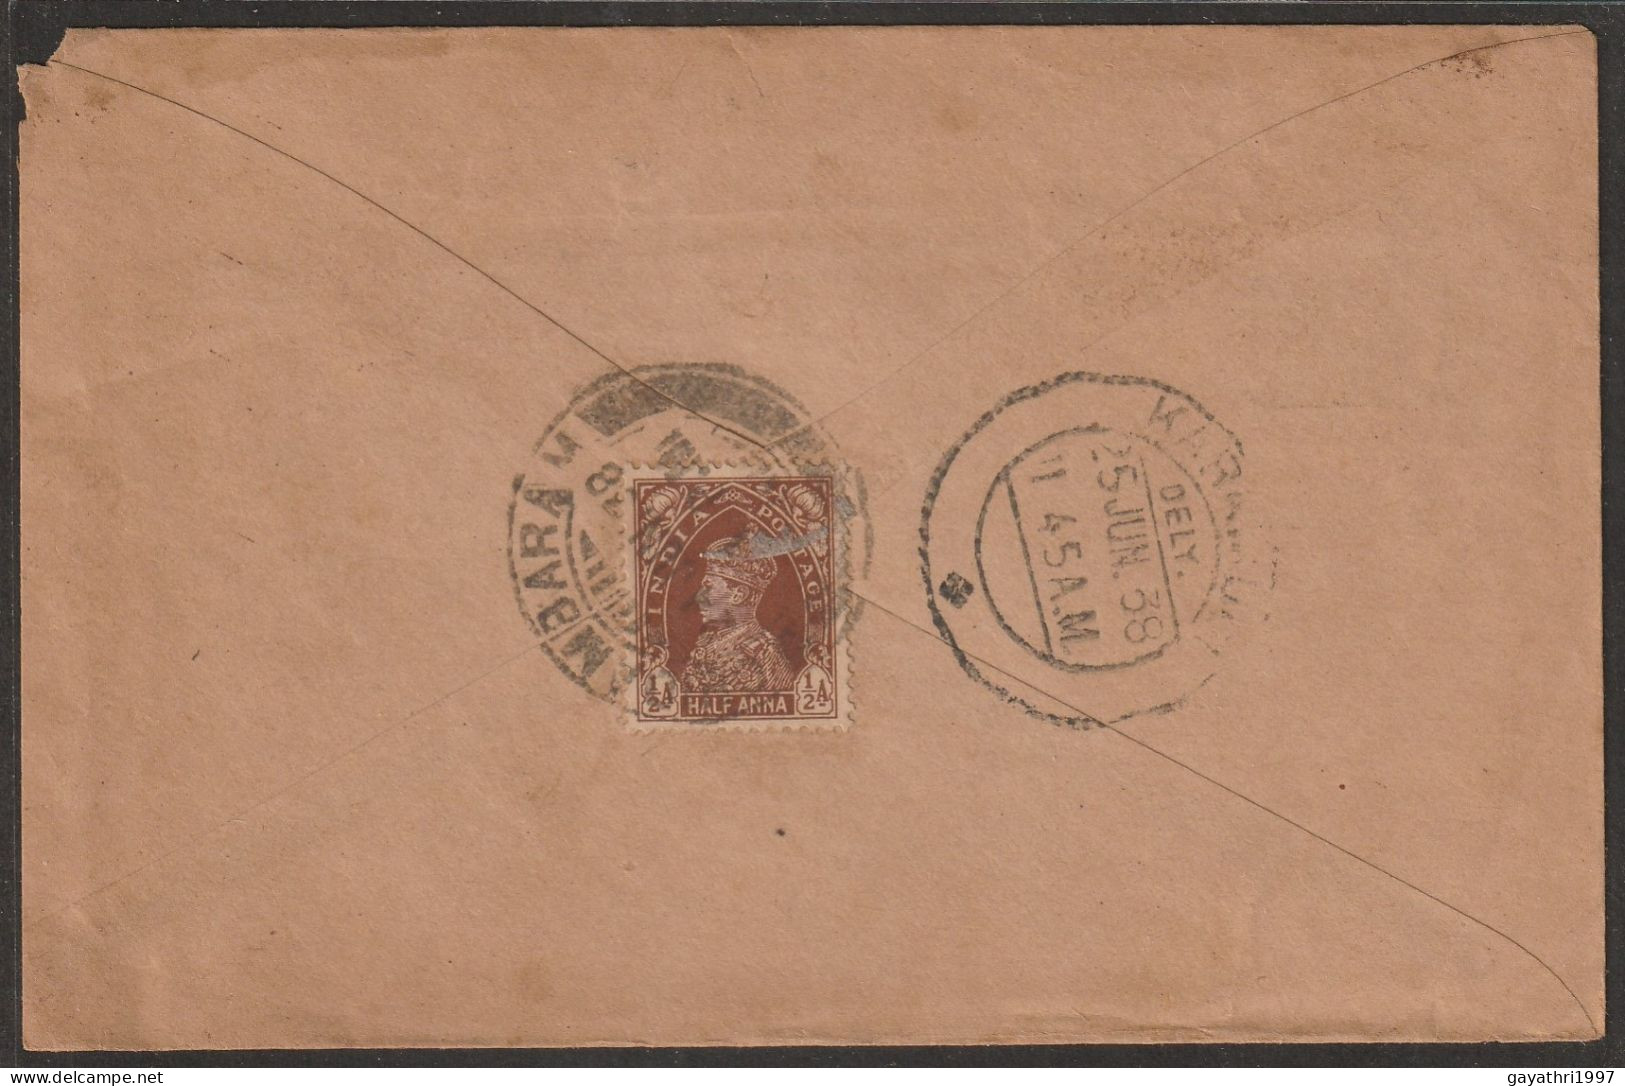 India 1938  K G VI Stamp On Cover From Chidambaram With Printed Hindu God (a71) - Hinduism